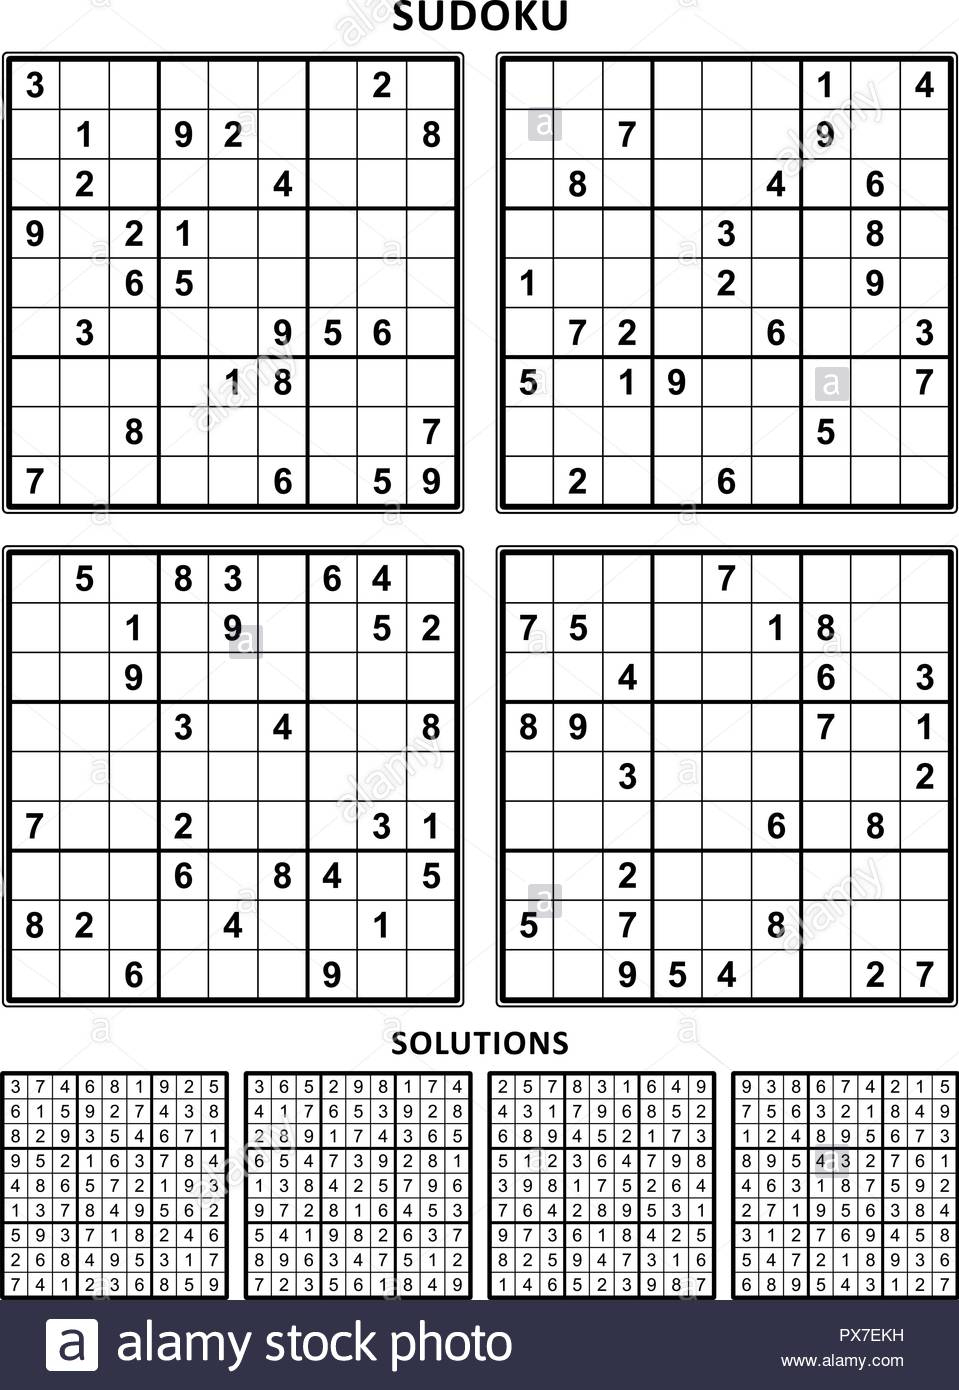 Four Sudoku Puzzles Of Comfortable Easy Yet Not Very Easy Sudoku 